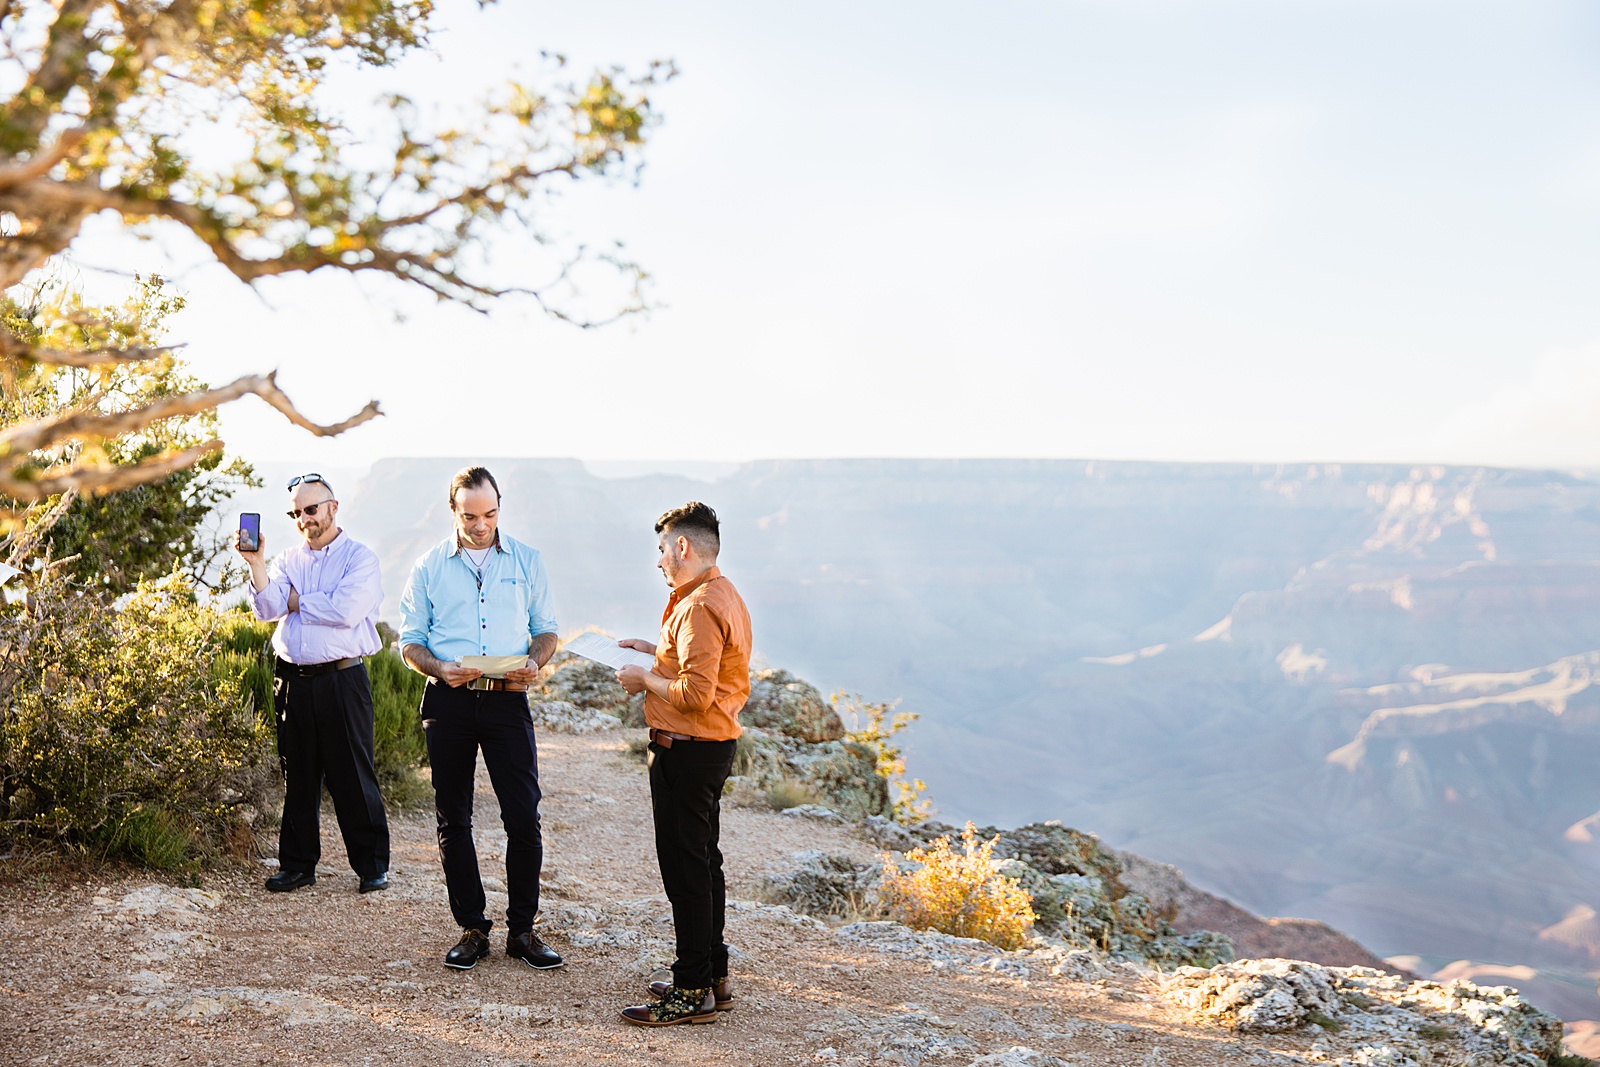 Groom looking at his groom during their vows wedding ceremony at Grand Canyon by Flagstaff elopement photographer Juniper and Co Photography.